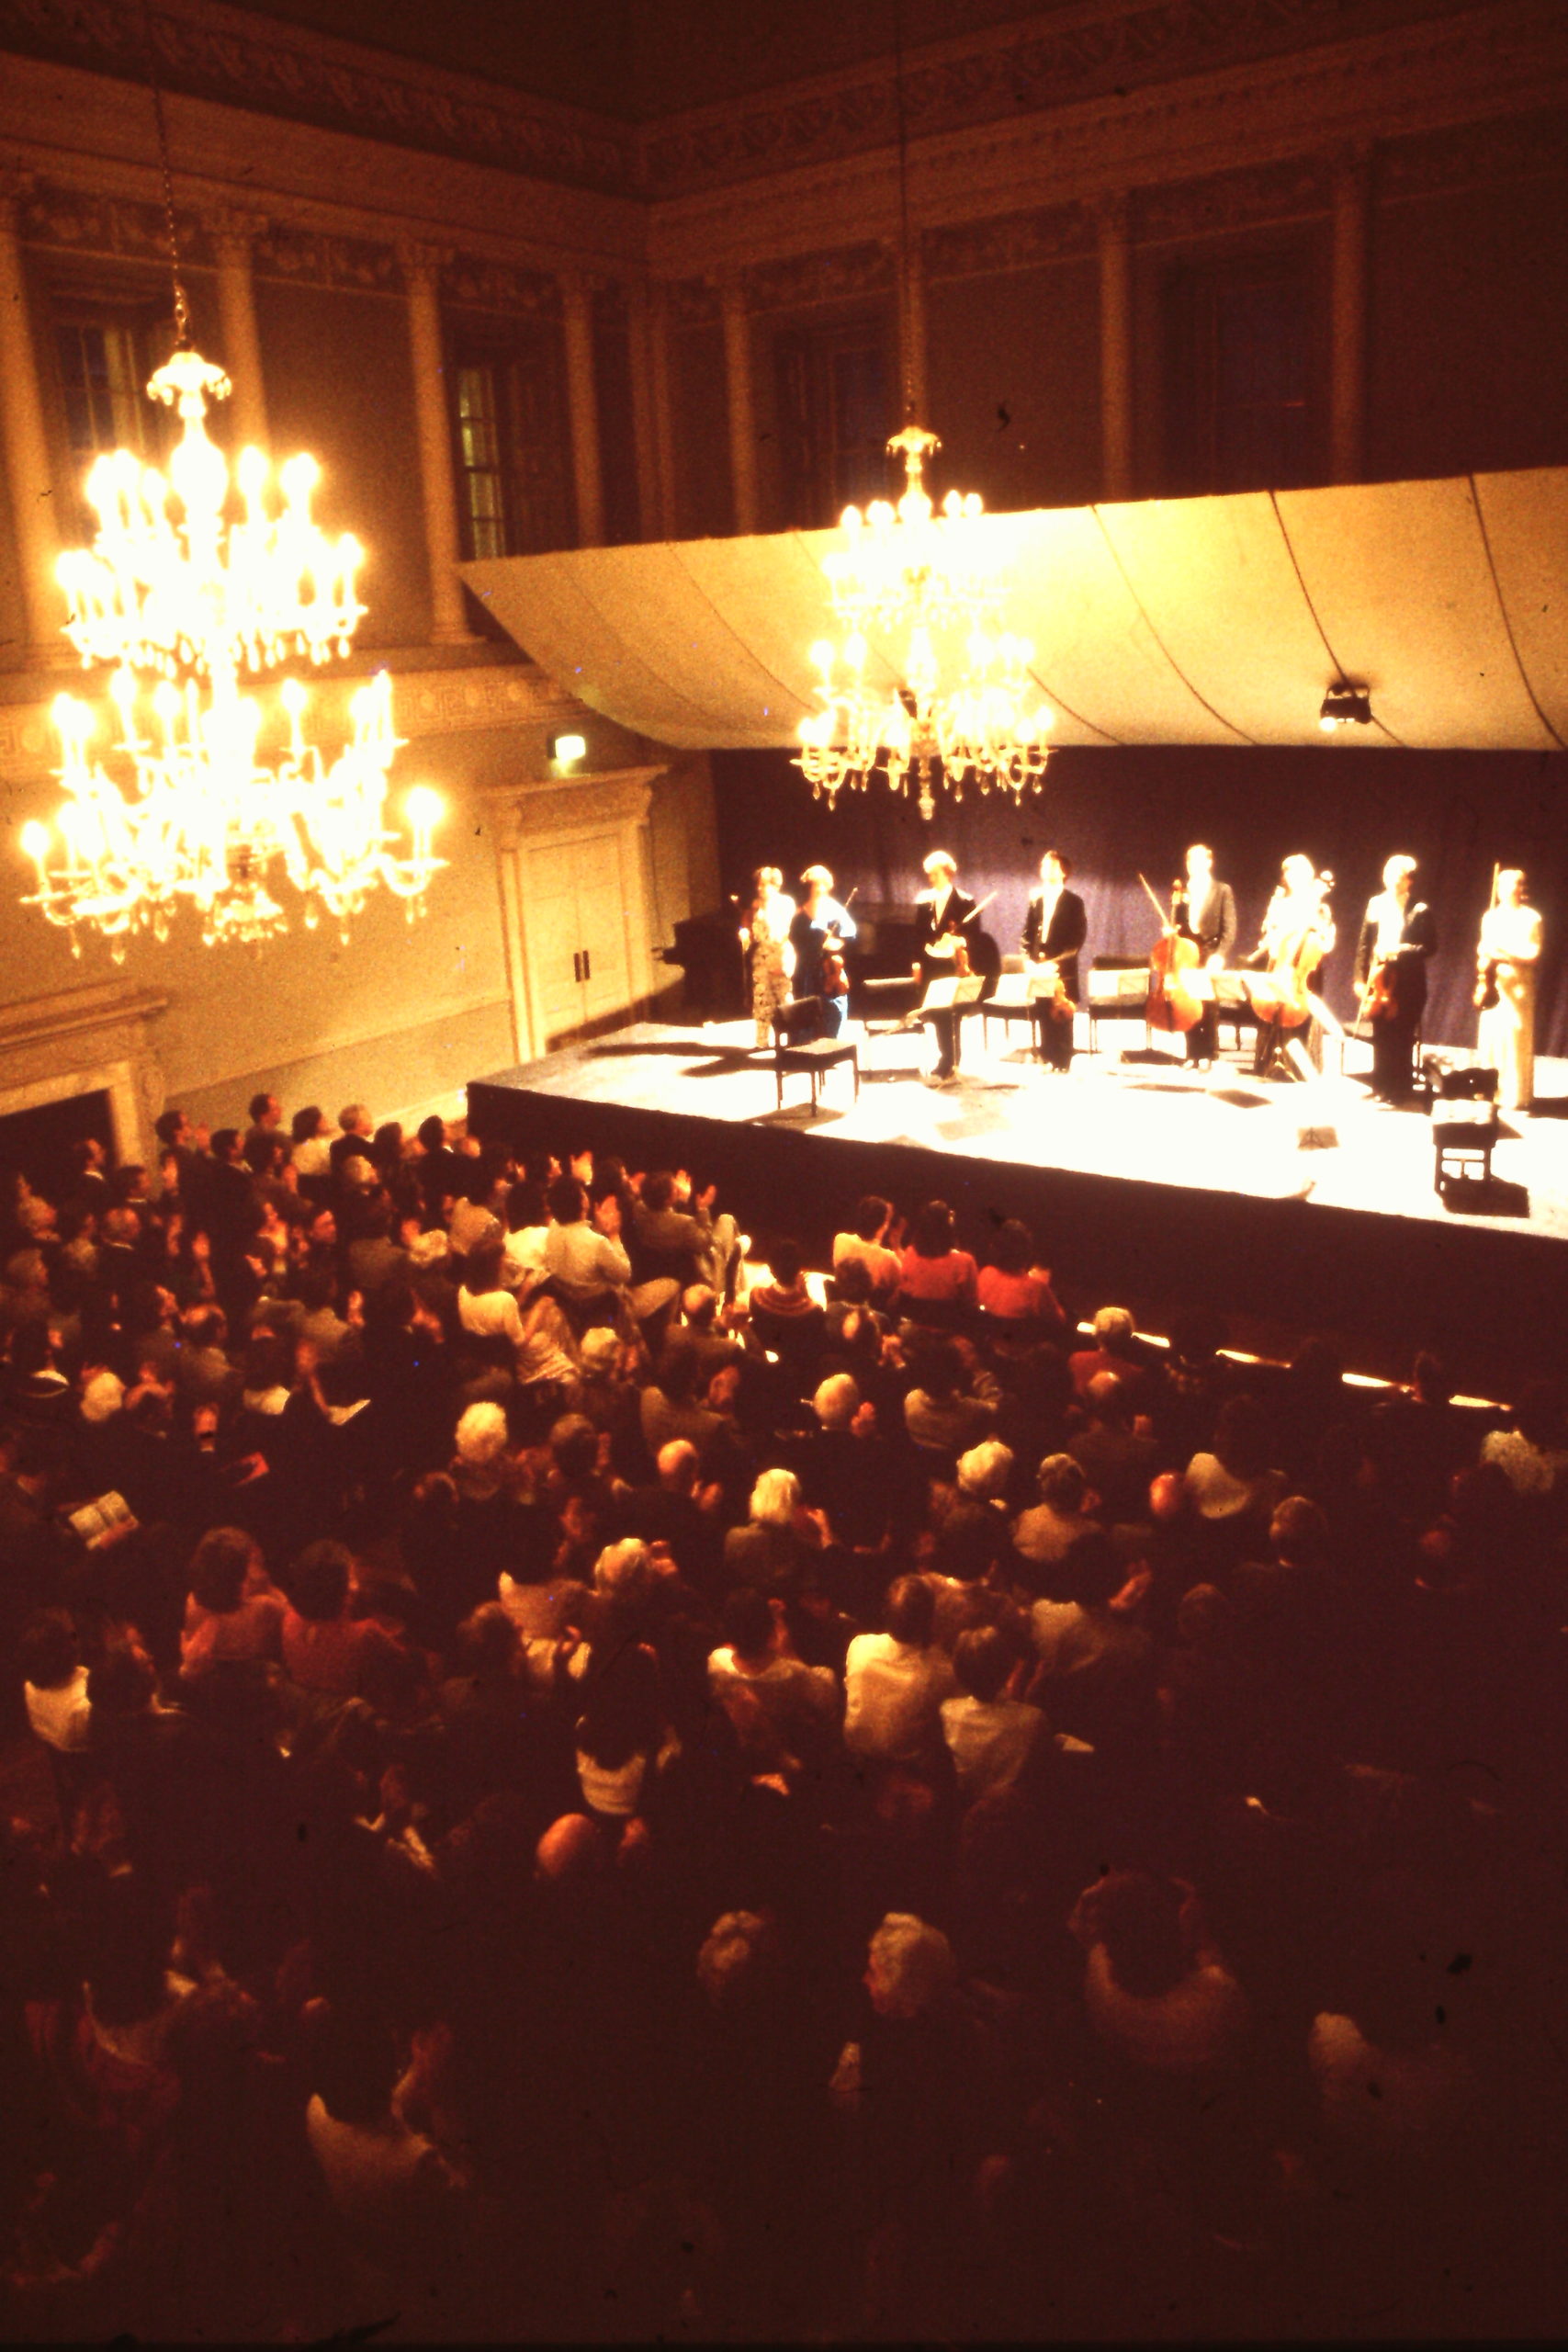 An orchestra performing inside the Assembly Rooms